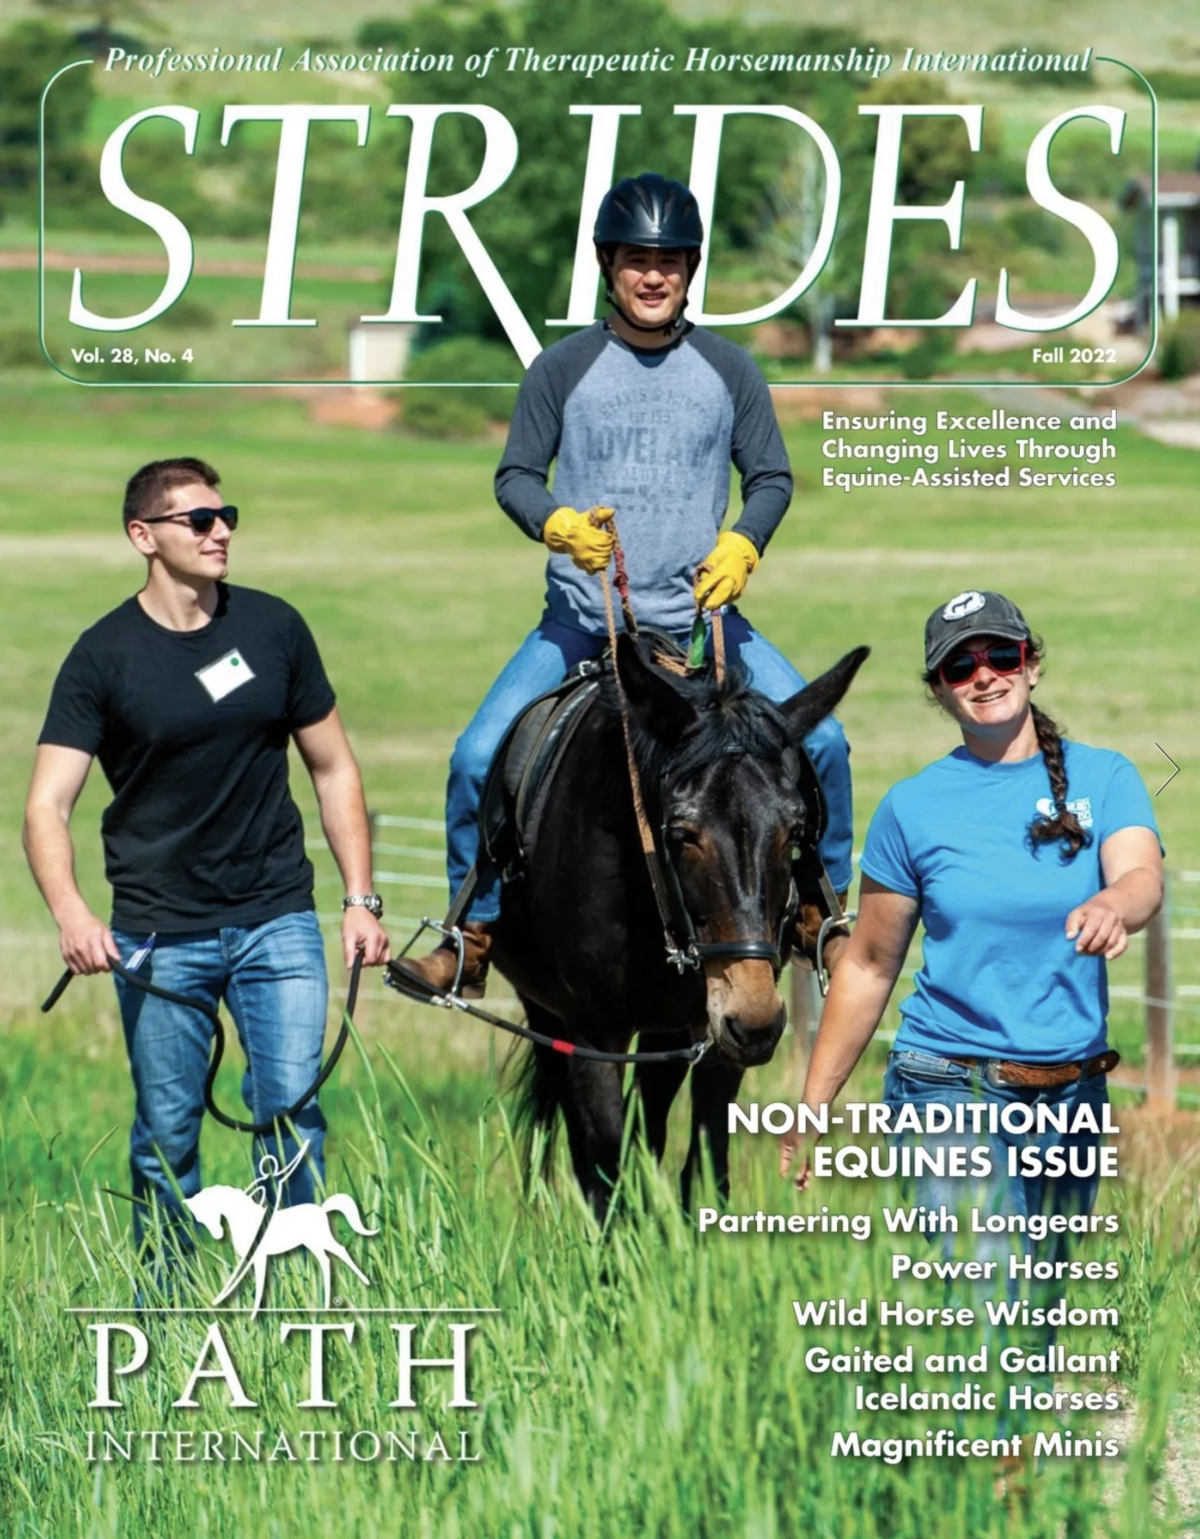 Strides Fall 2022 issue